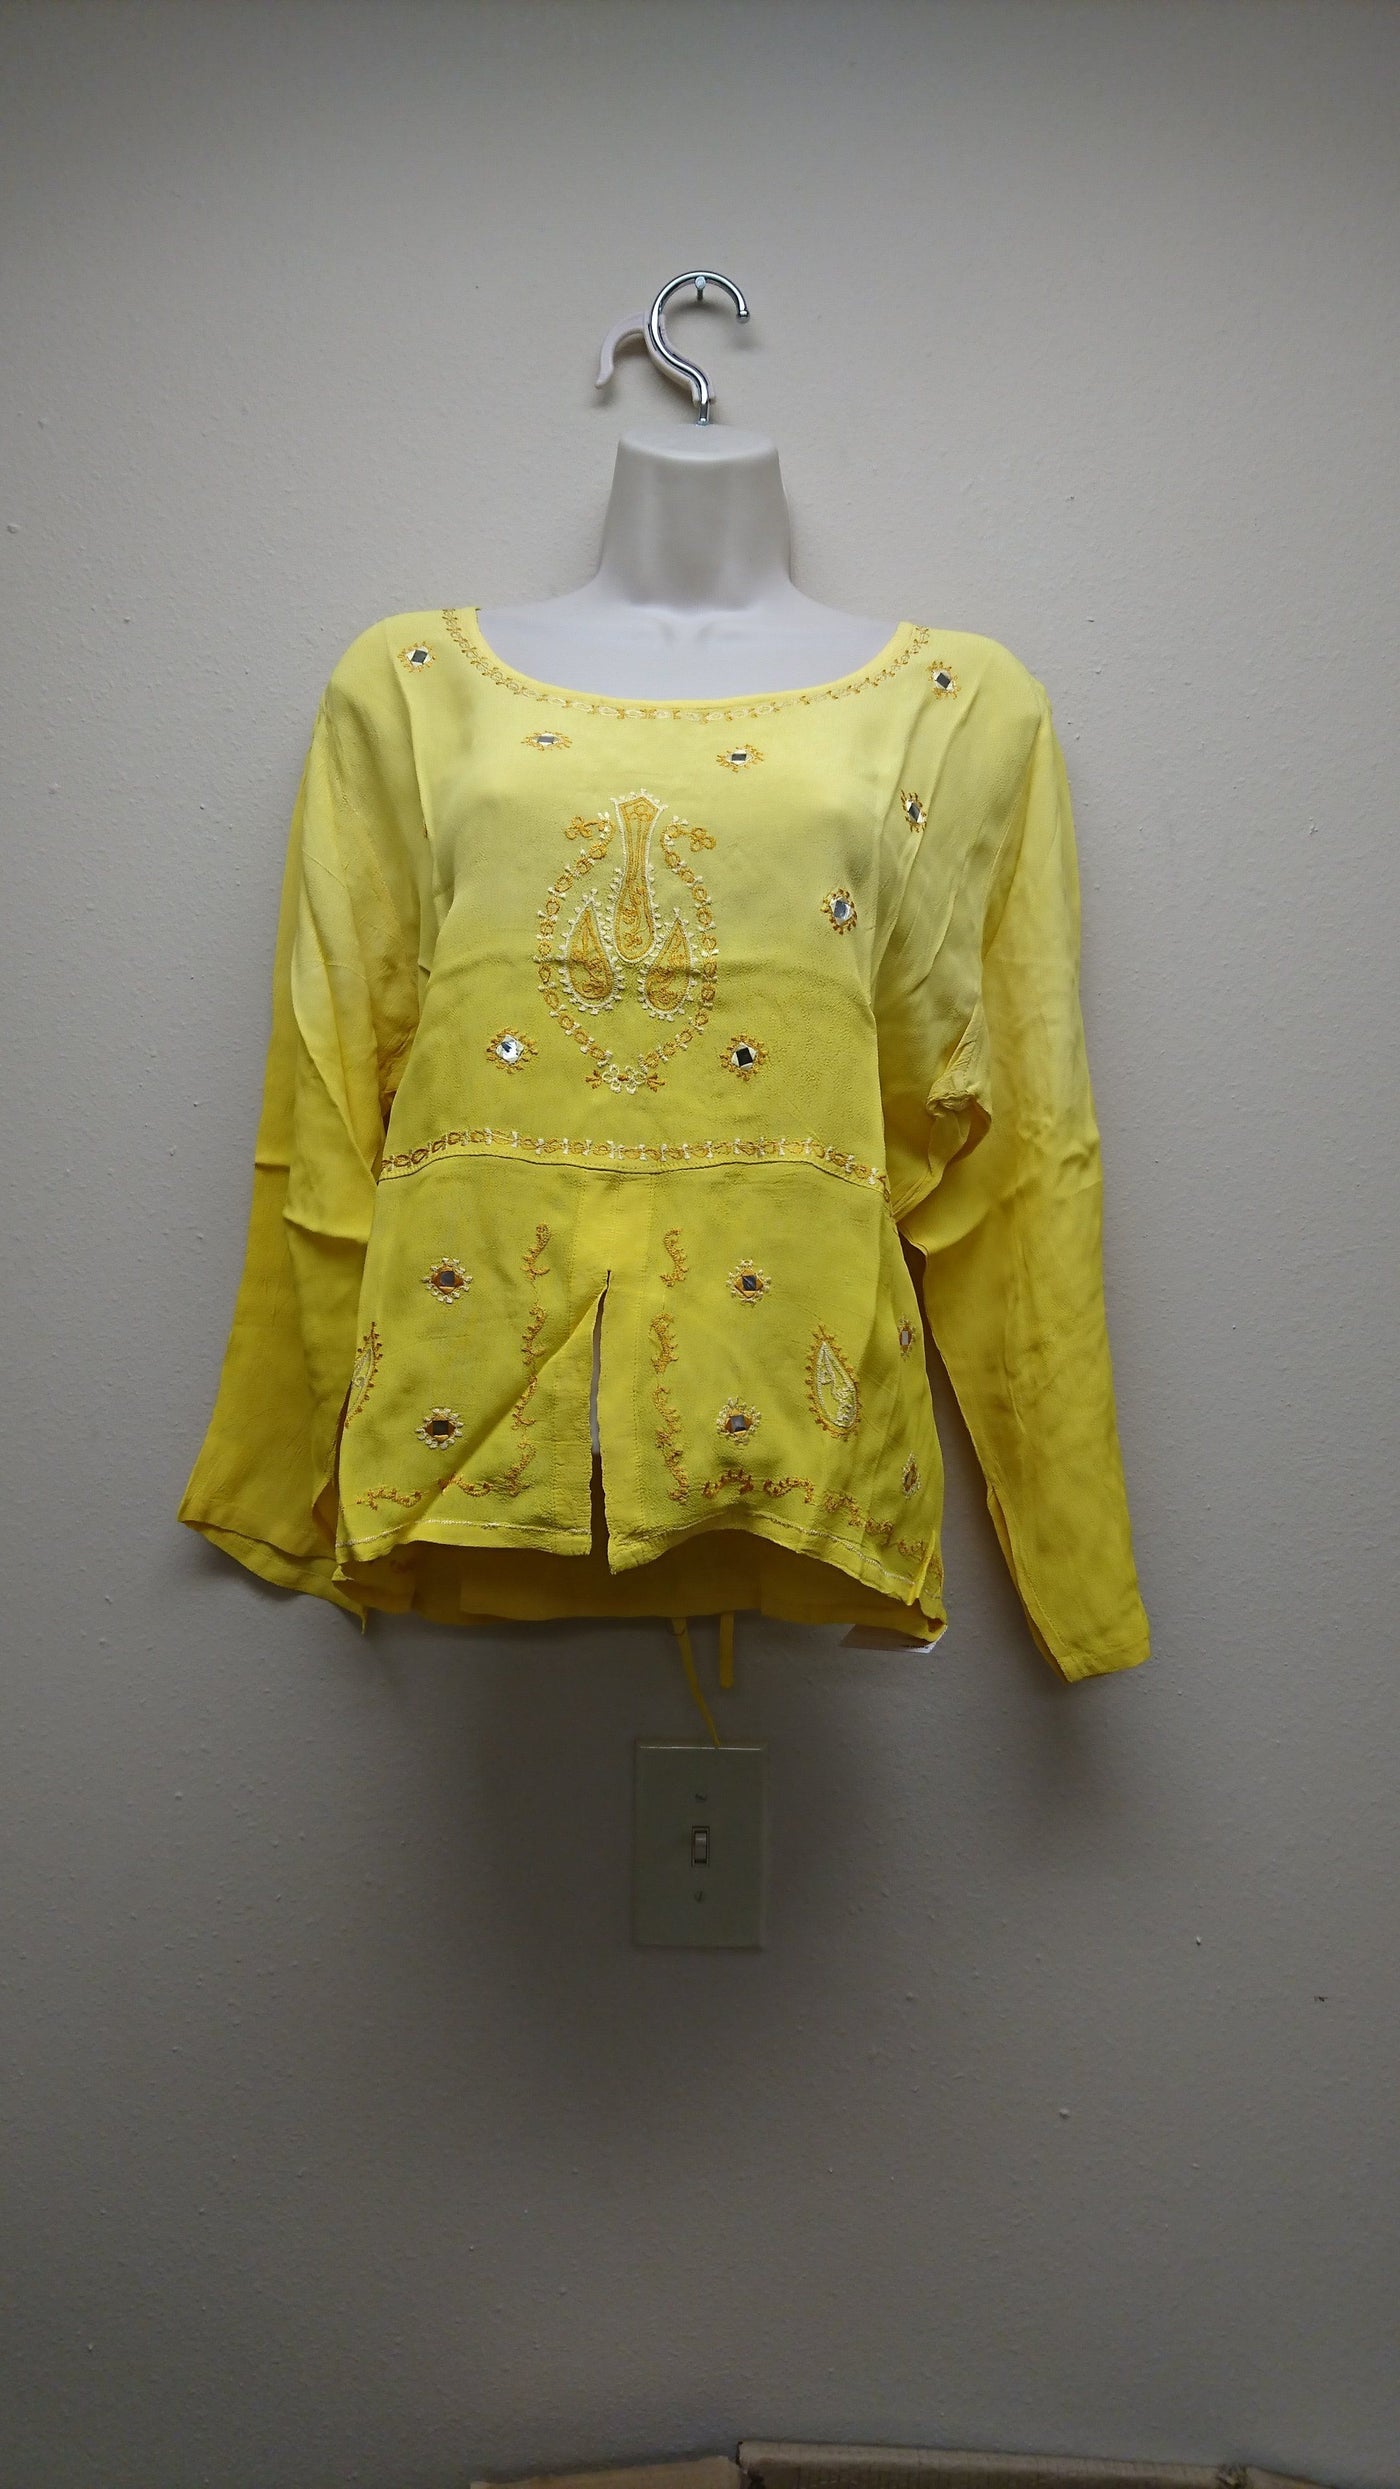 Kurti Blouse Top in Yellow - Indian Clothing in Denver, CO, Aurora, CO, Boulder, CO, Fort Collins, CO, Colorado Springs, CO, Parker, CO, Highlands Ranch, CO, Cherry Creek, CO, Centennial, CO, and Longmont, CO. Nationwide shipping USA - India Fashion X